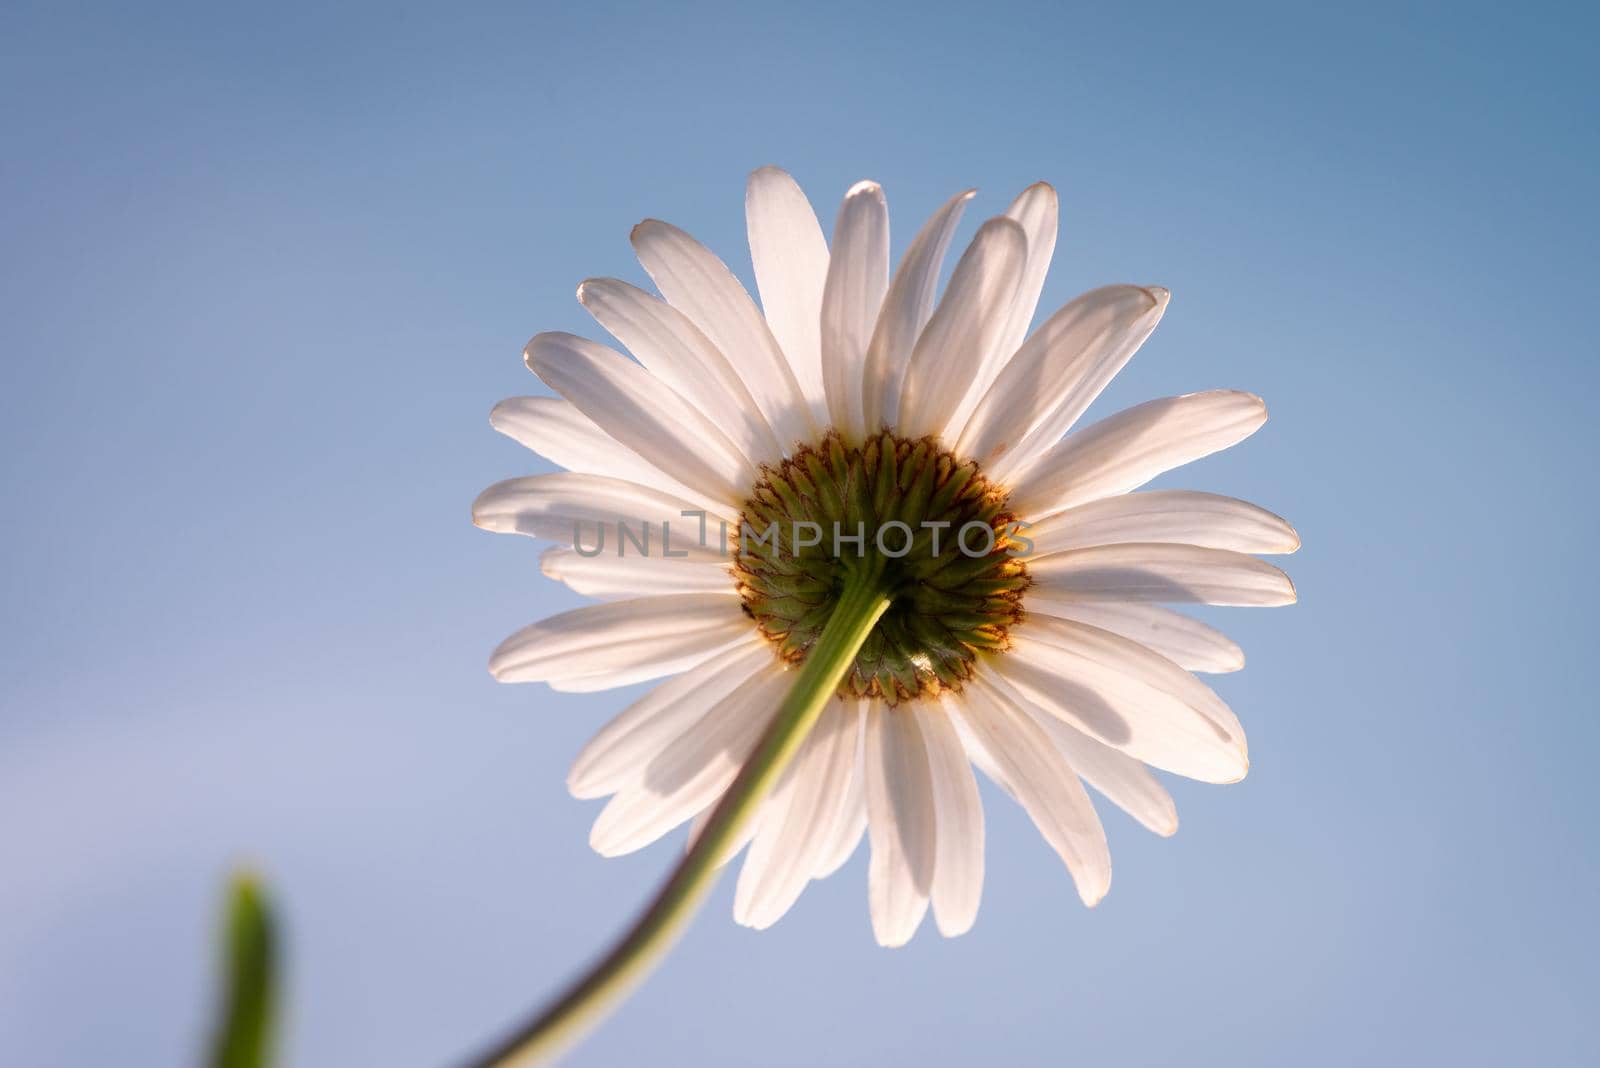 Daisy flower on sunny meadow, close up, copy space